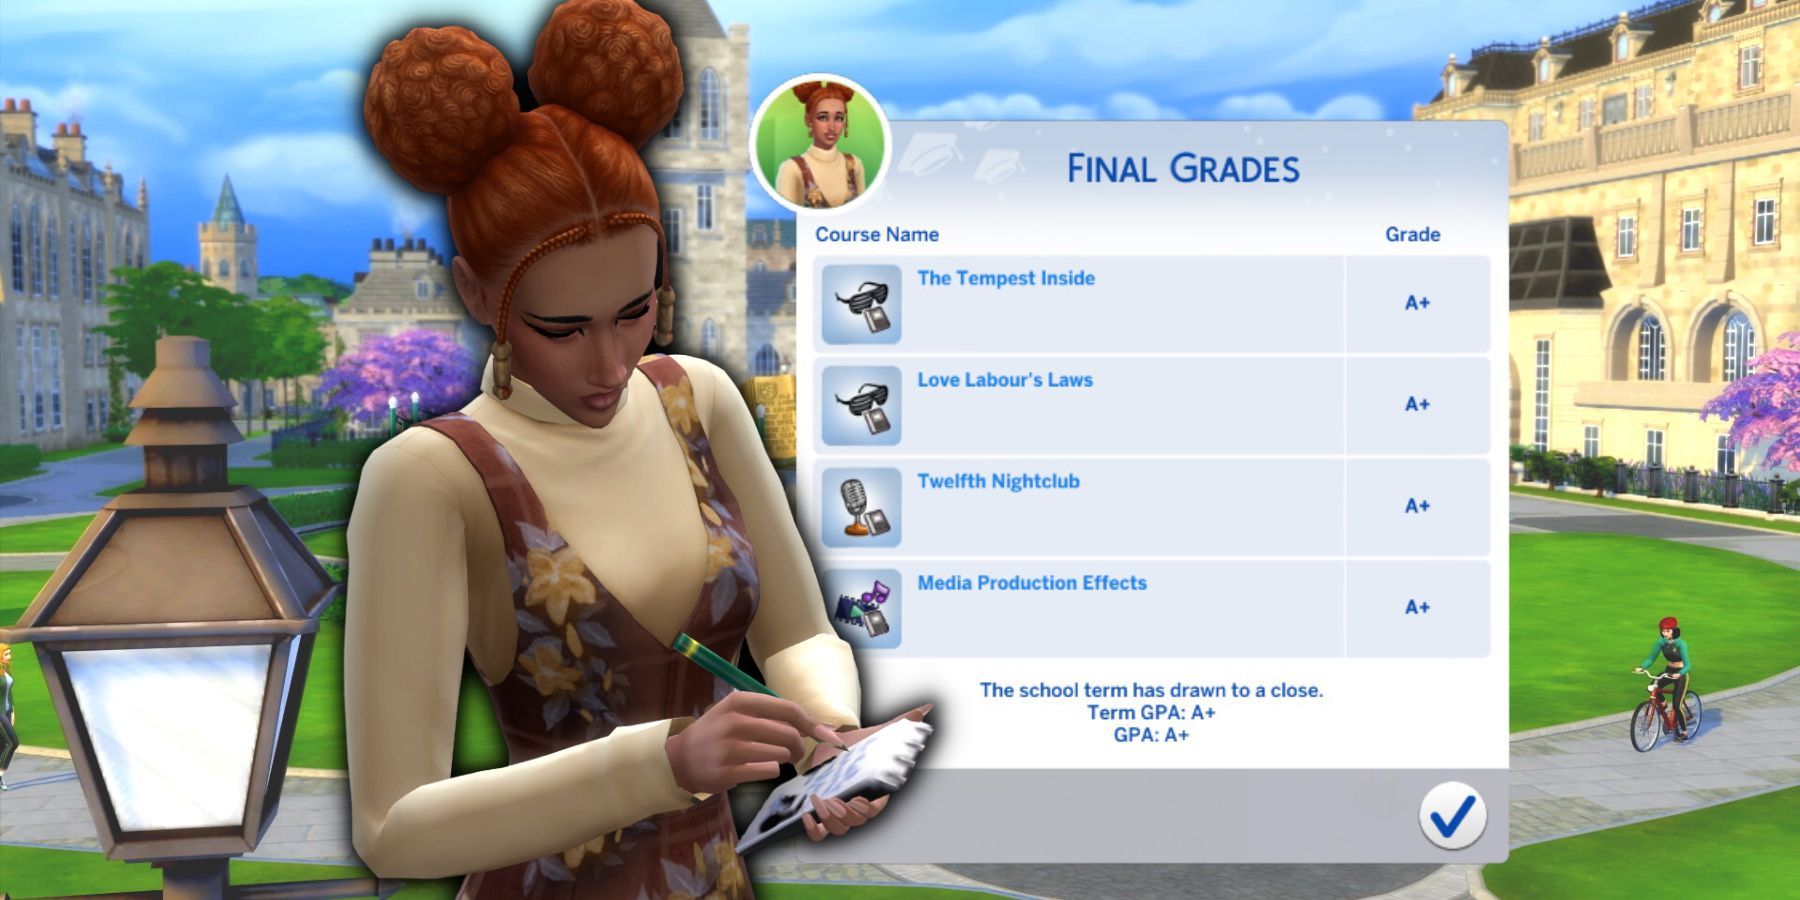 How to Complete Coursework - The Sims 4 Guide - IGN